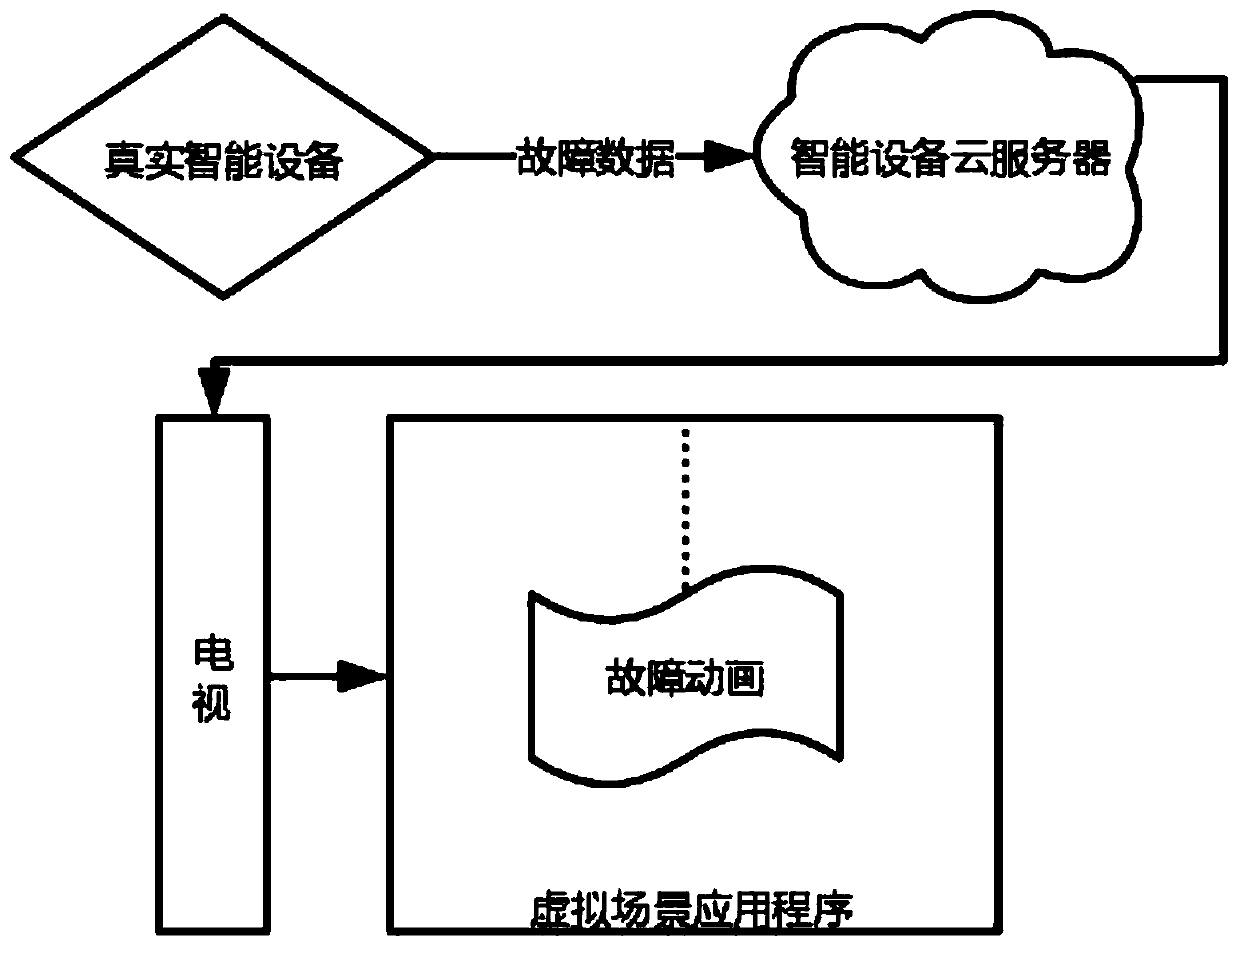 Smart home scene simulation and equipment control method and system based on smart television